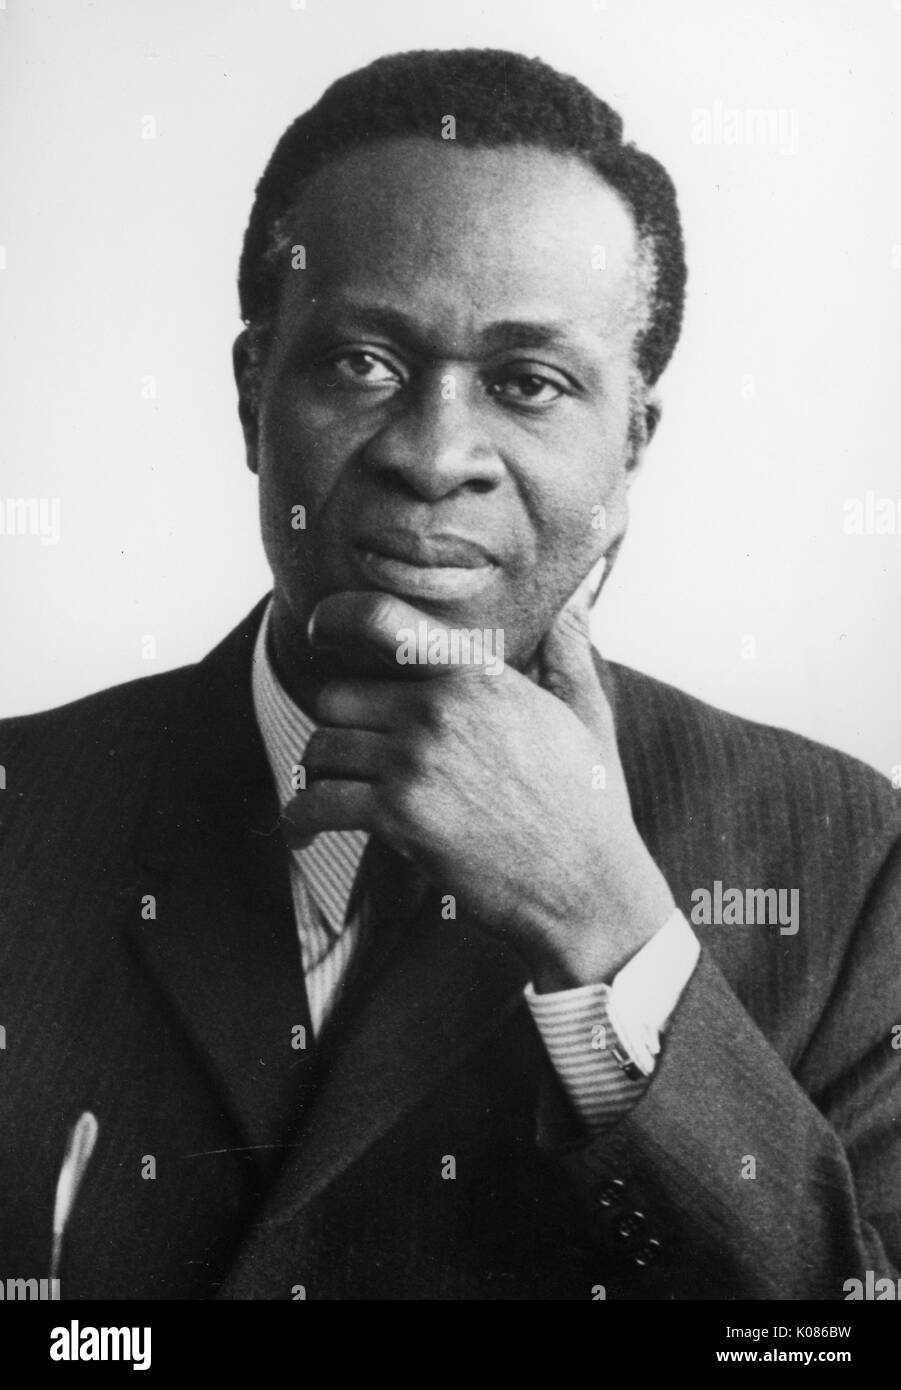 Head shot of Dr Thomas Adeoye Lambo, Nigerian scholar, administrator and psychiatrist, with a neutral expression, resting his head on his left arm, wearing a suit jacket, dress shirt, tie, and cuff links, 1973. Stock Photo